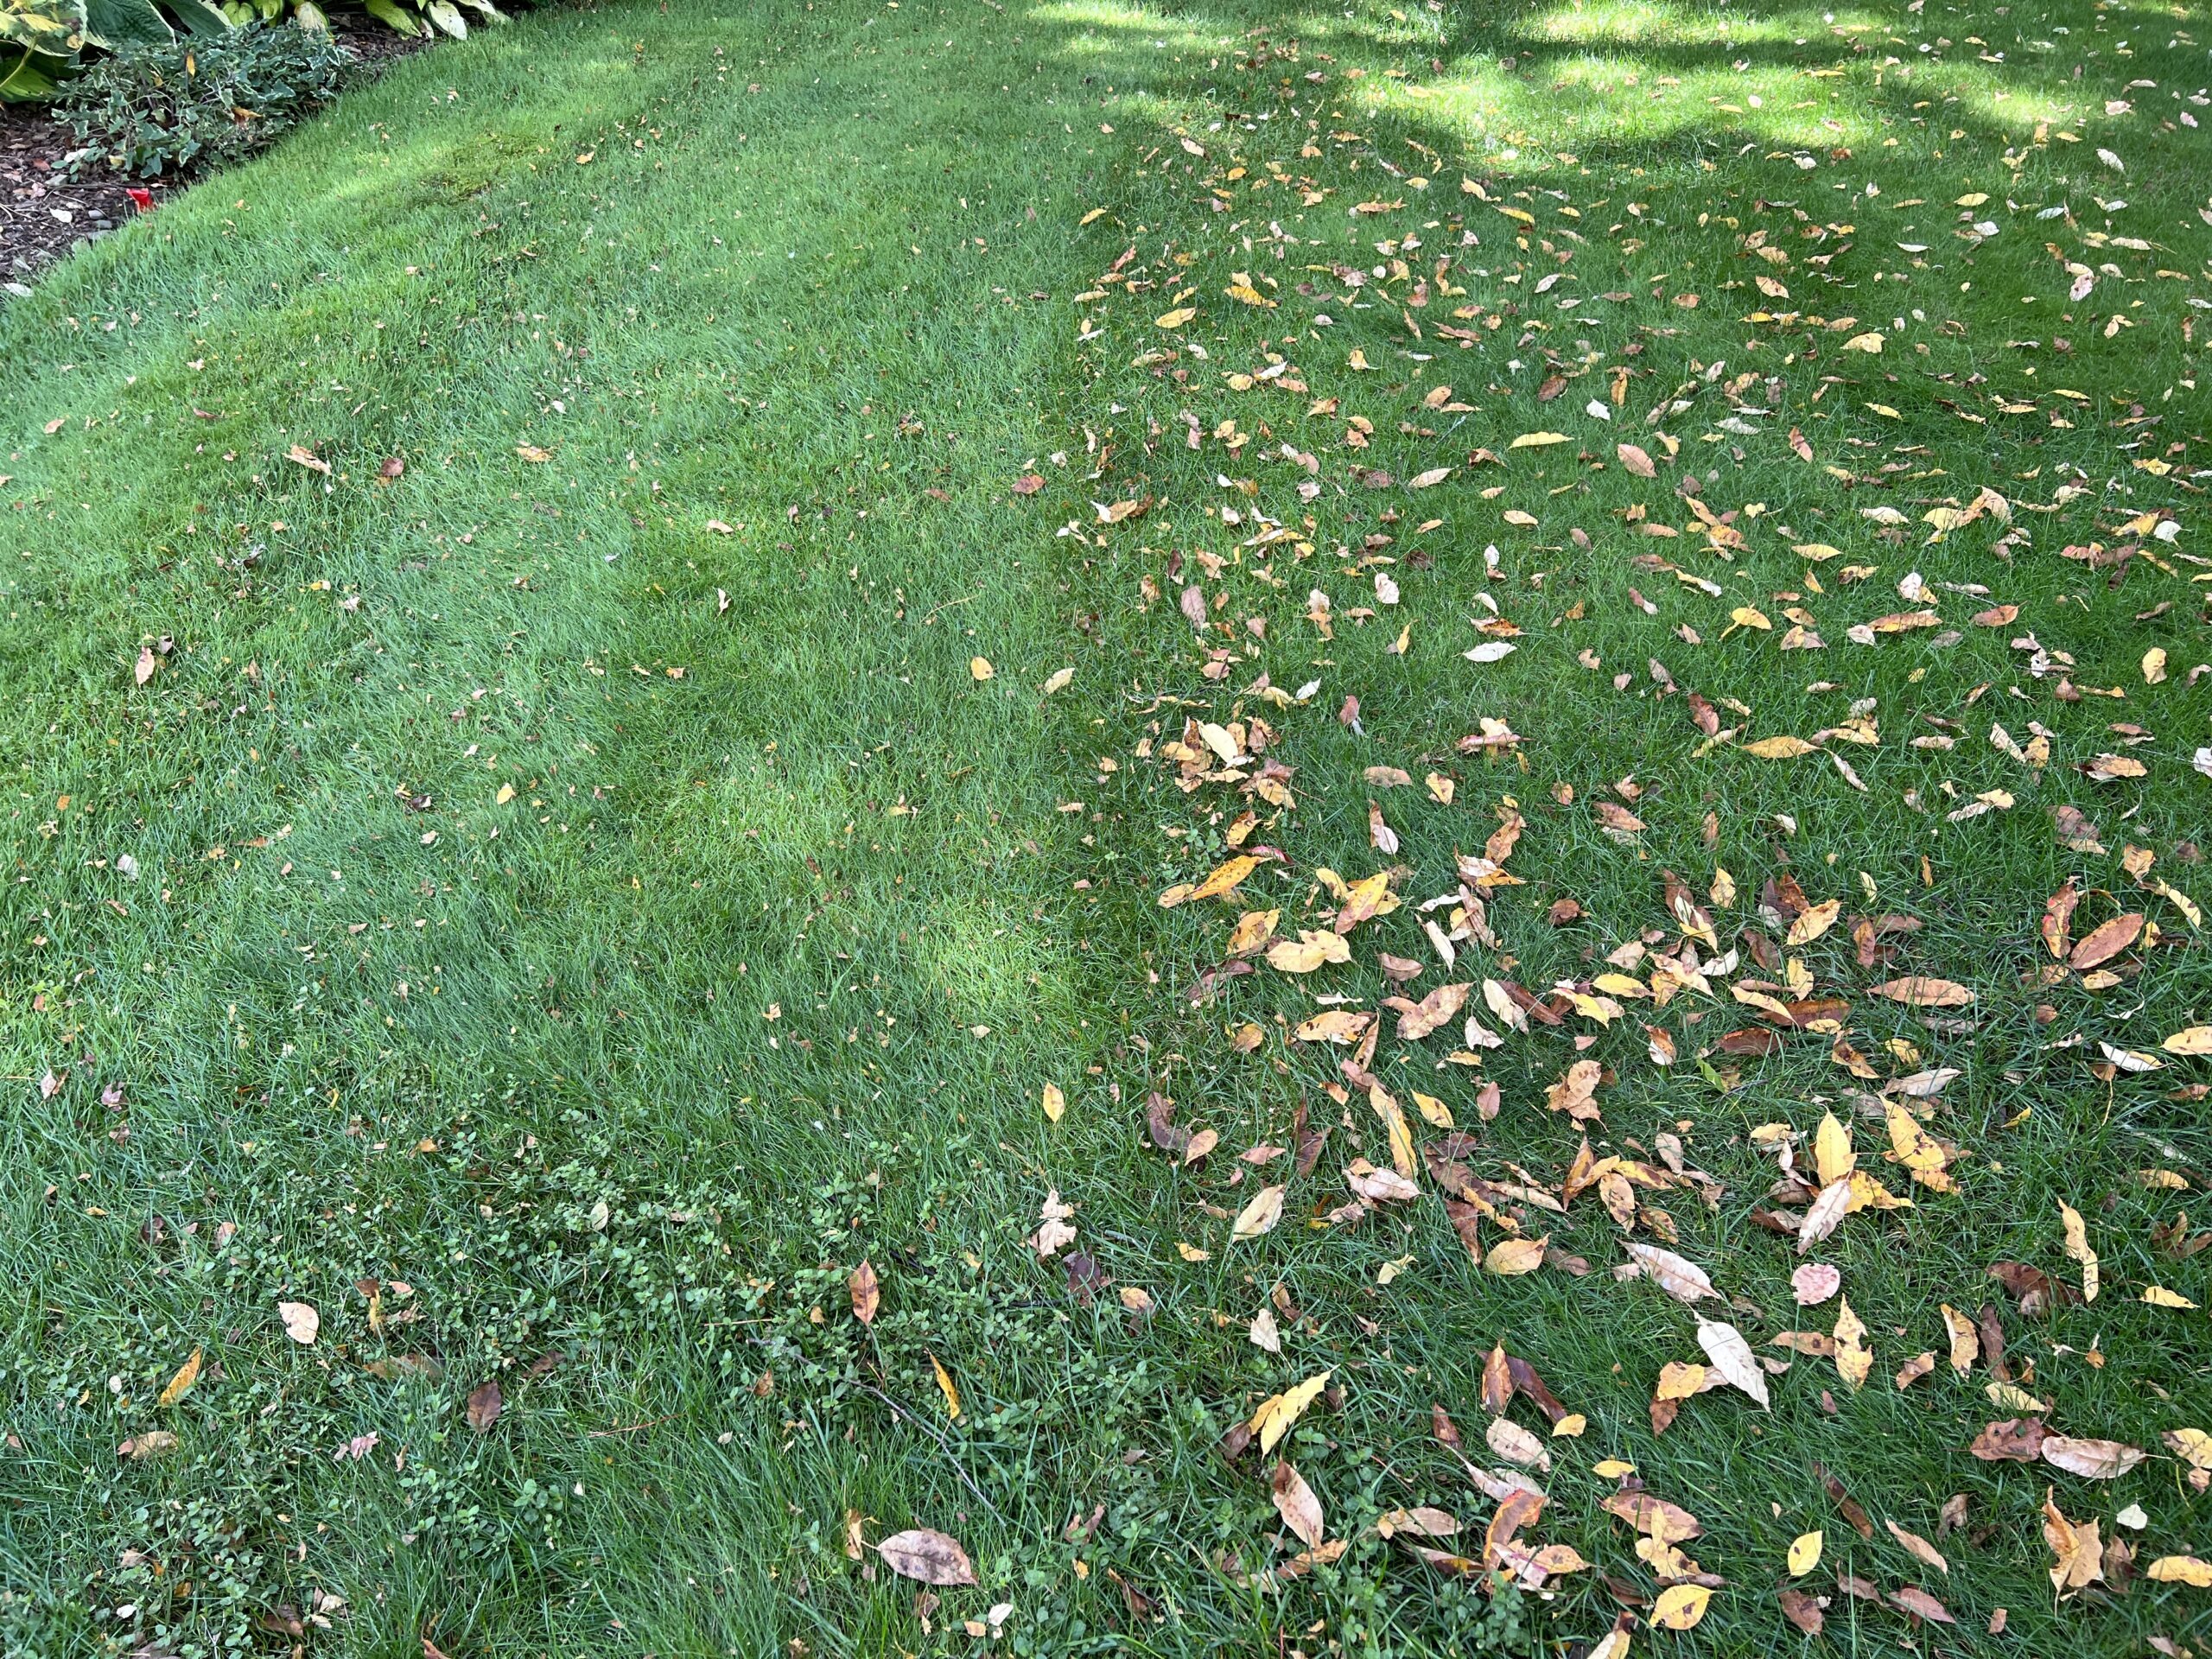 Mulching mower results from a John Deer X380 with Gator blades. Unmowed on the right, just mowed on the left. A second pass would have made even the shredded leaves invisible. ANDREW MESSINGER